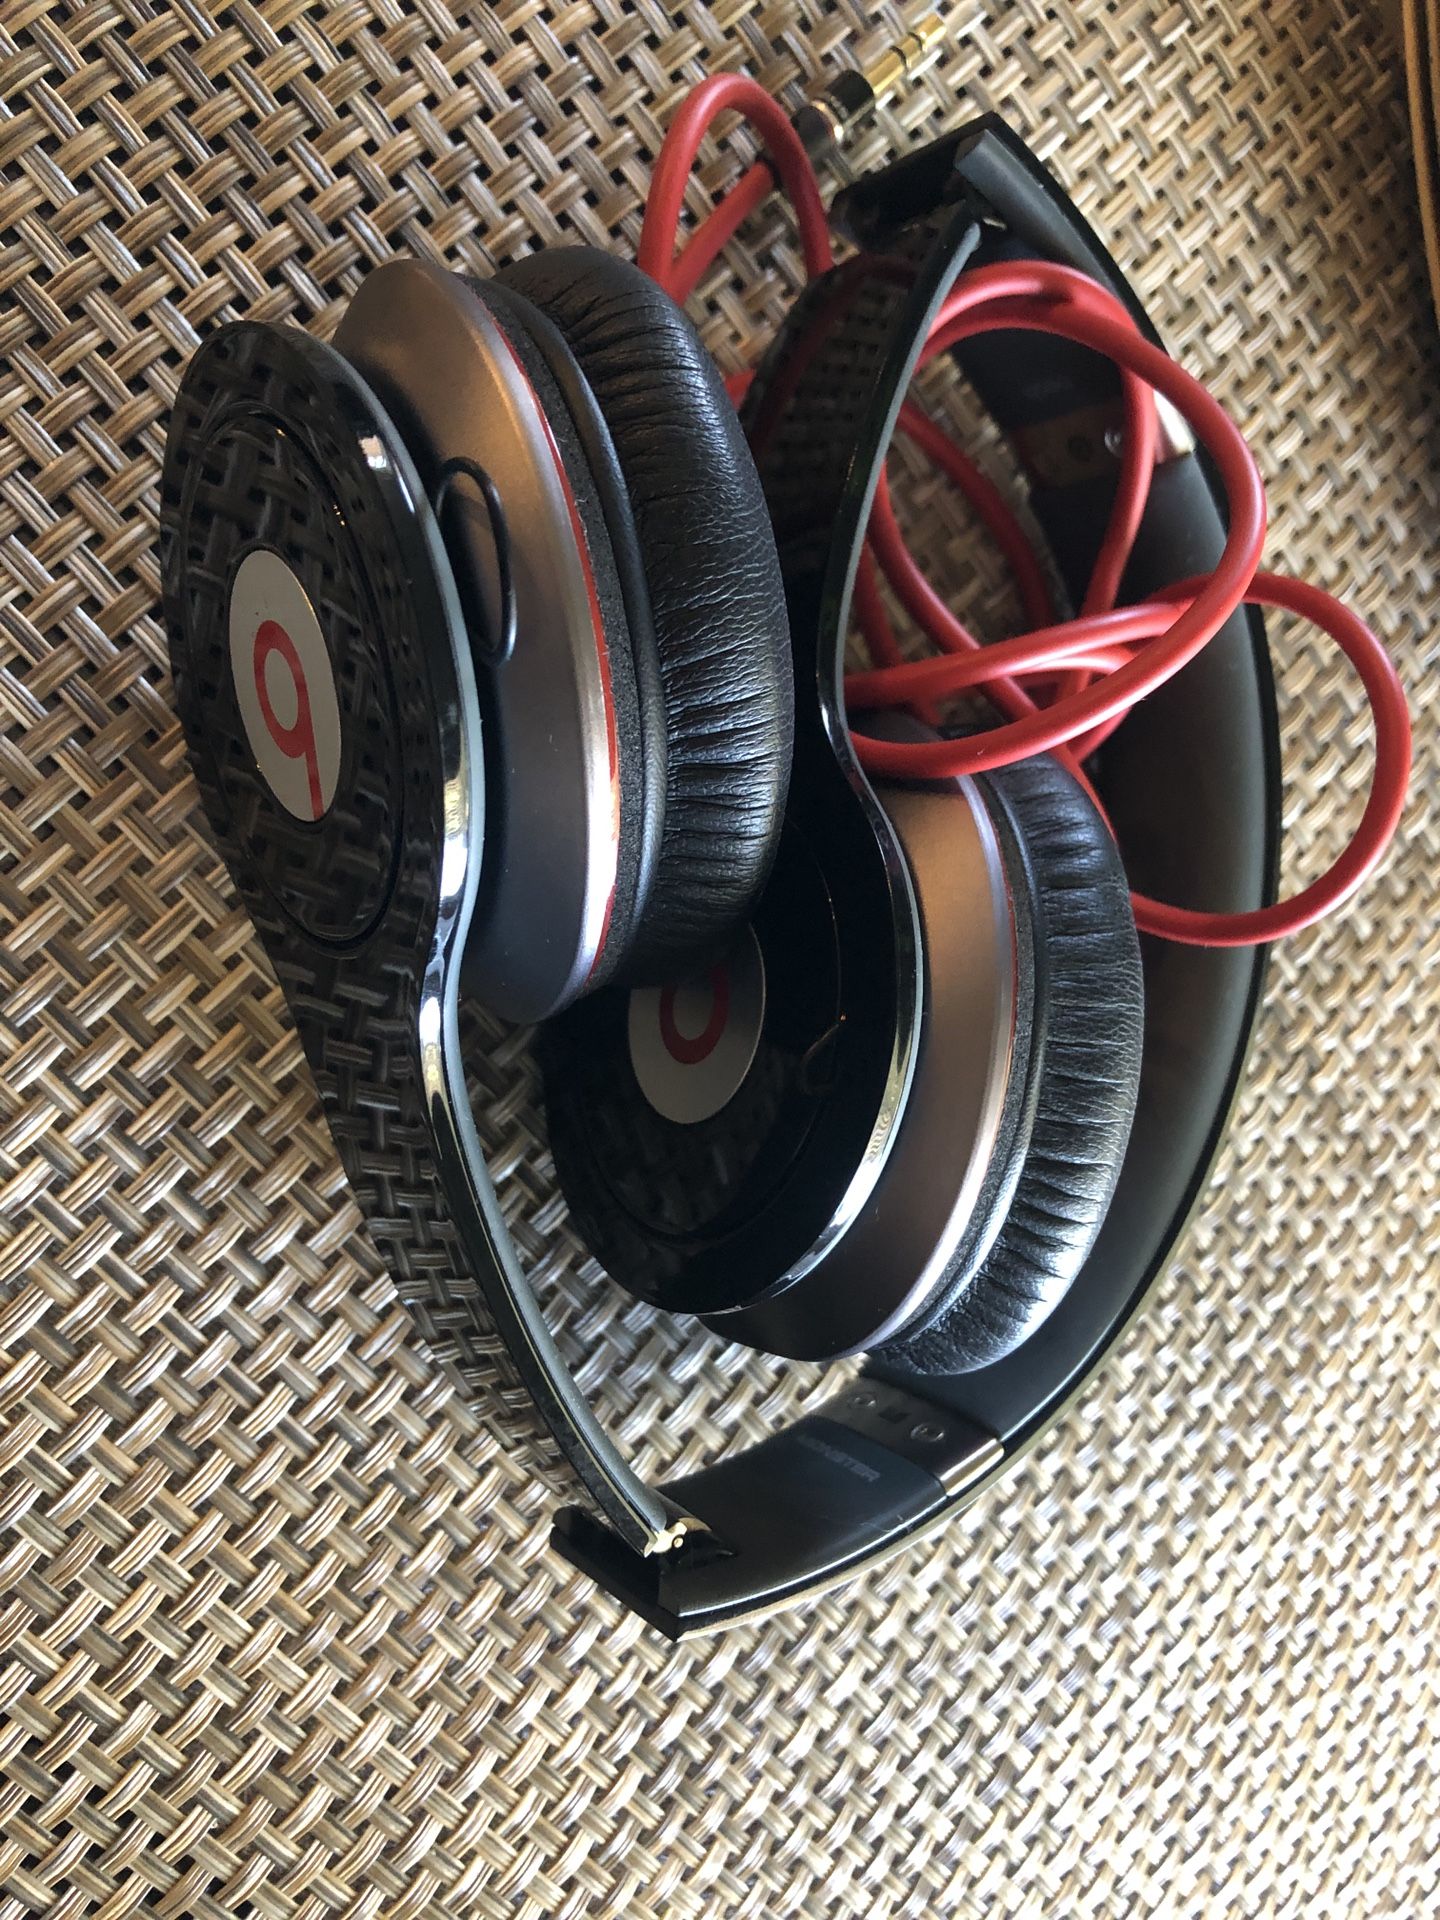 Wired Beats Solos